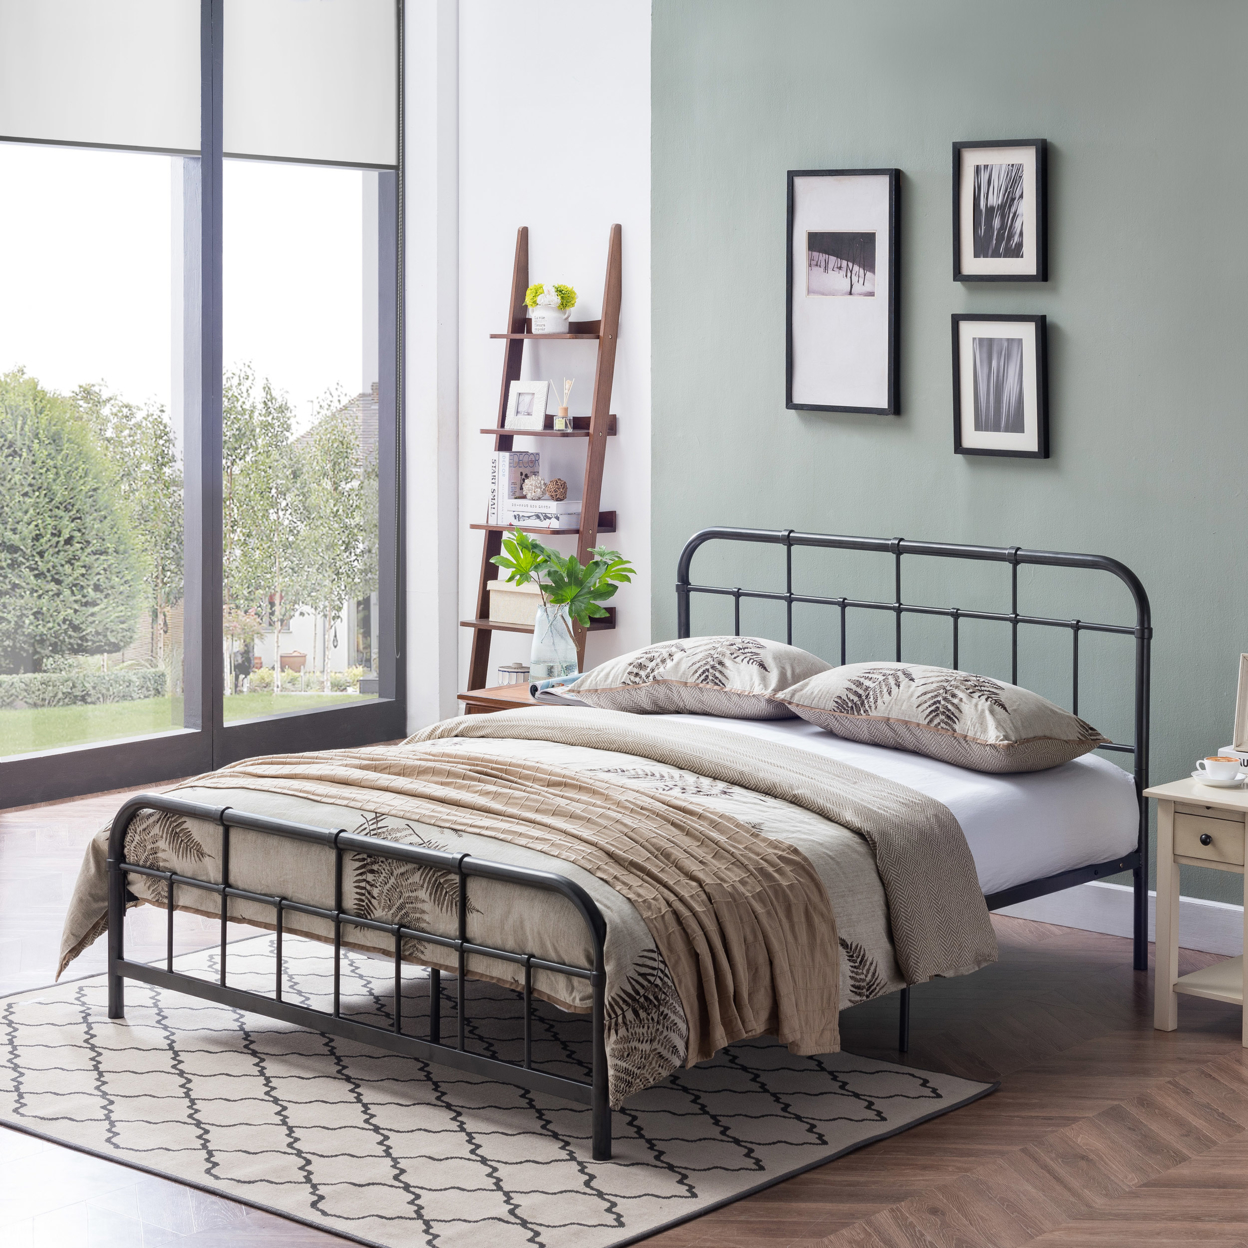 Sylvia Queen-Size Iron Bed Frame, Minimal, Industrial - Hammered Copper